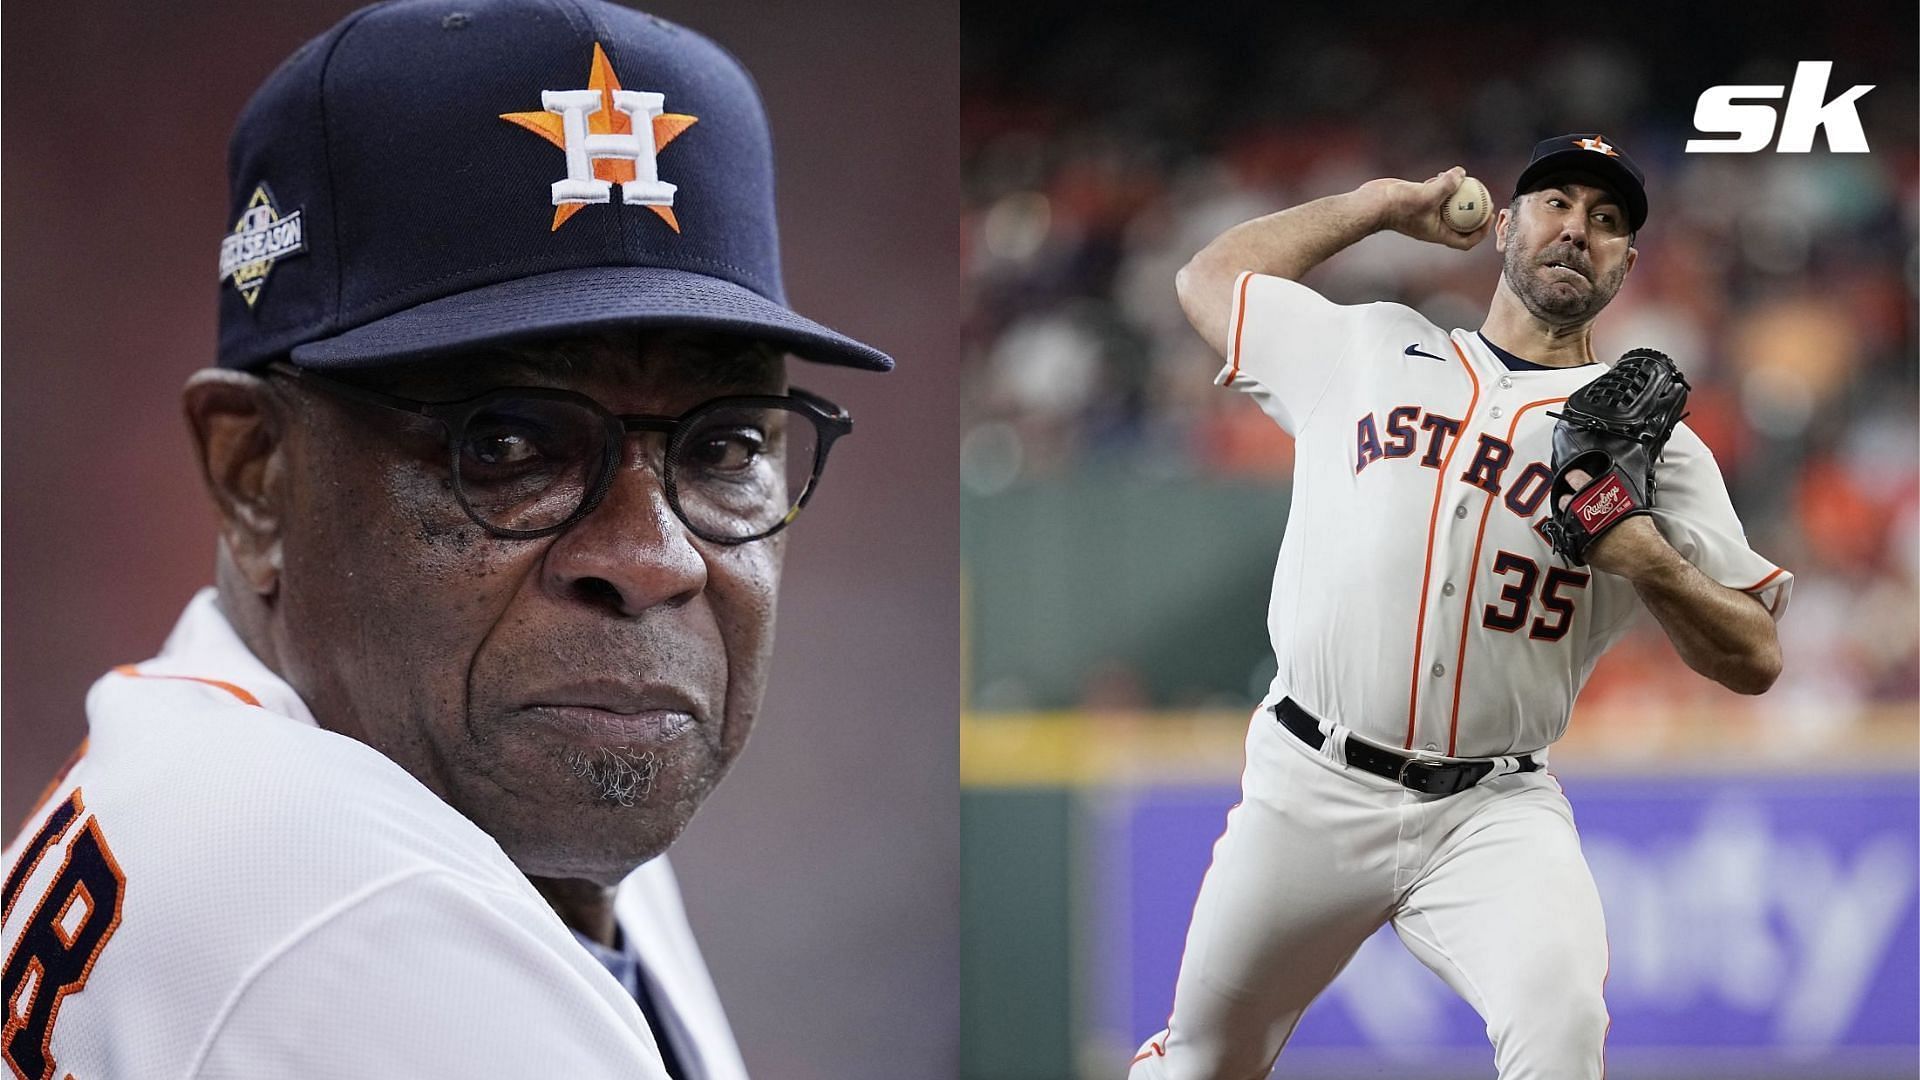 Dusty Baker remains uncertain if Justin Verlander will be available to pitch for the Houston Astros in Game 7 of the ALCS